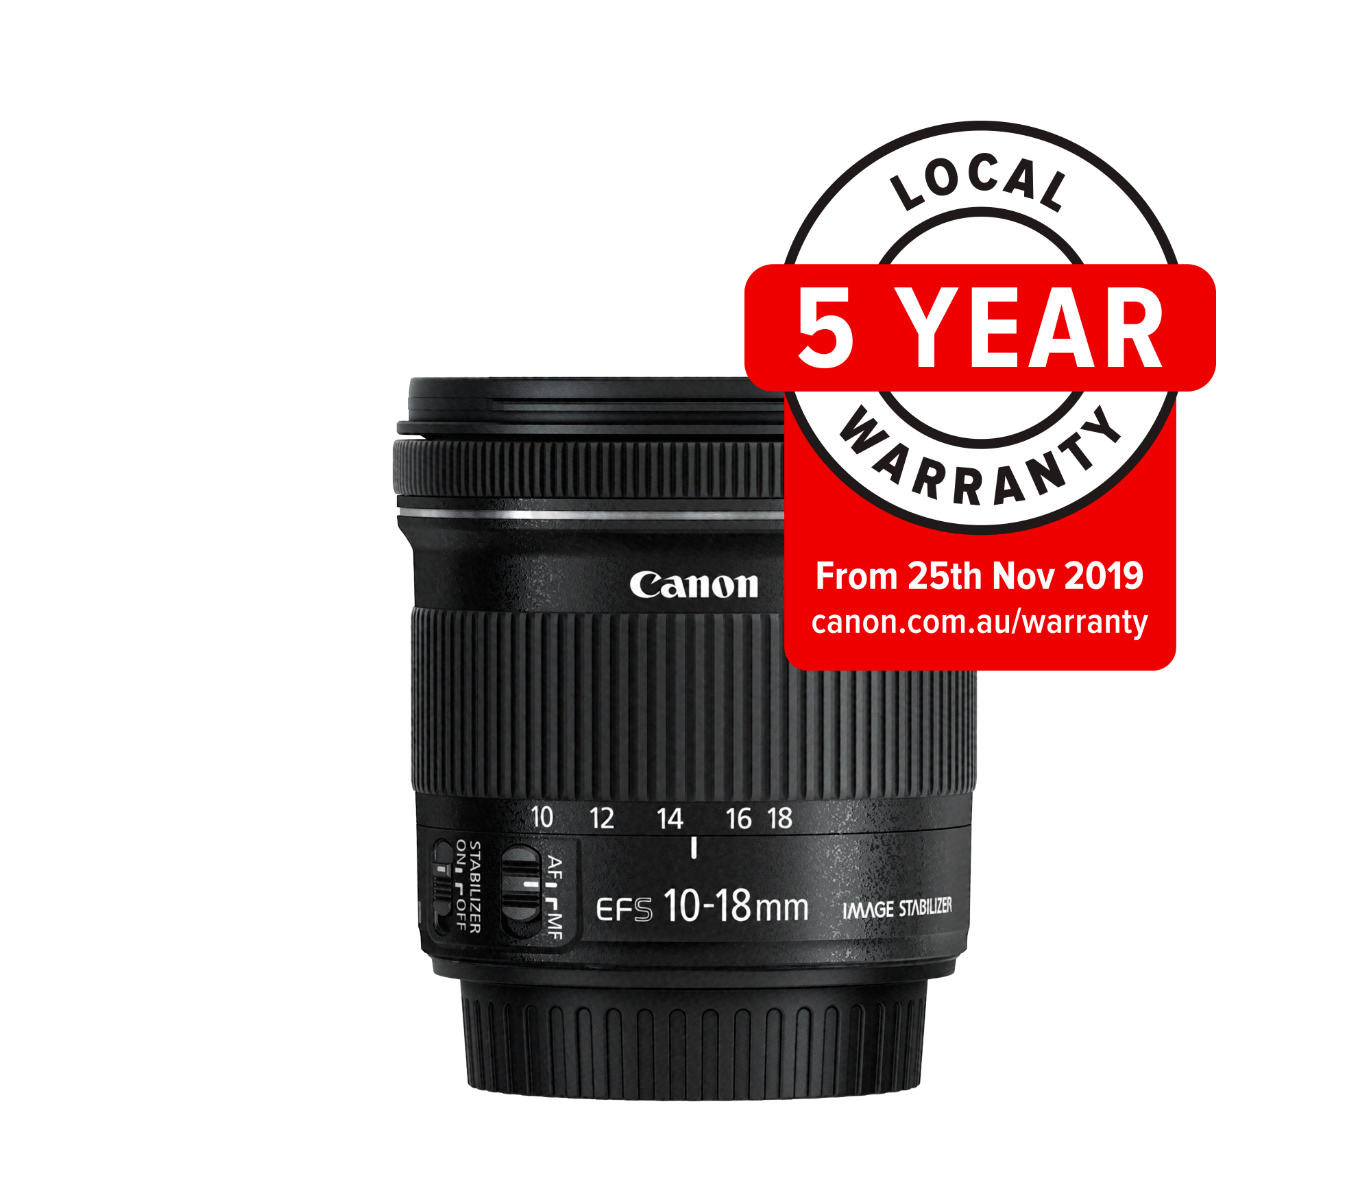 Image of Canon EF-S 10-18mm f/4.5-5.6 IS STM Wide Angle Lens